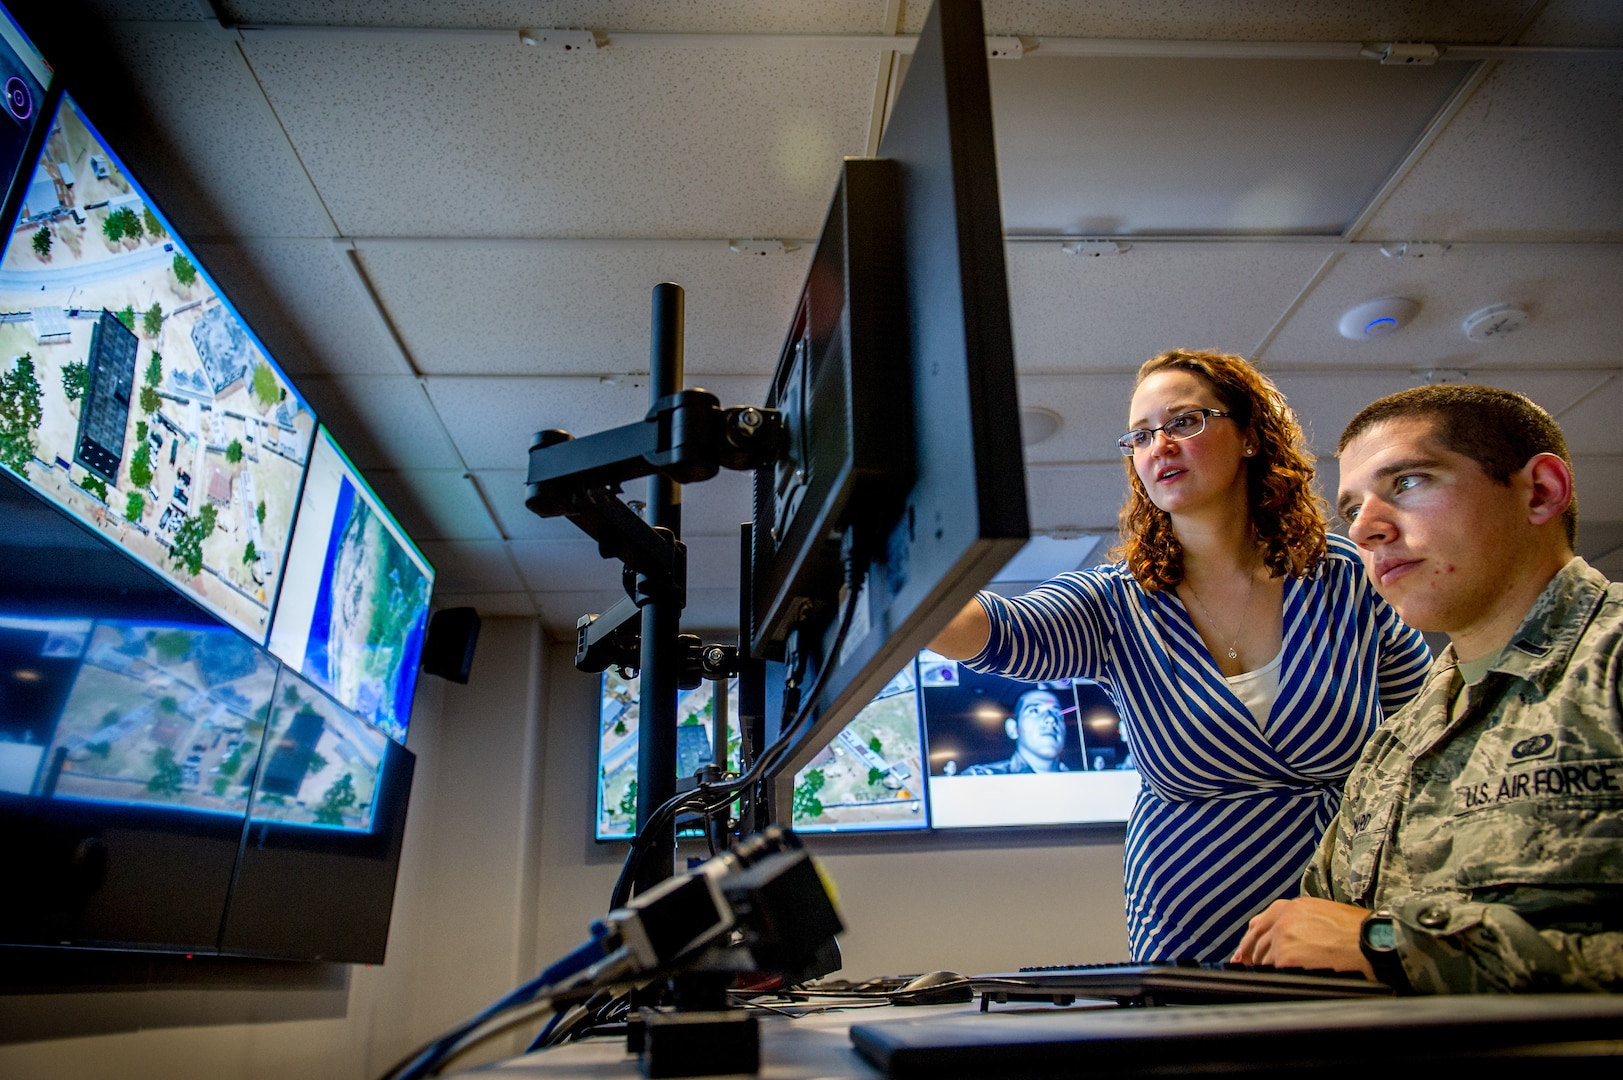 Associate research engineer Cassandra Stanfill, with Intelligence, Surveillance Augmentation, and Reconnaissance Branch, uses eye-tracking technology, among other methods, on test subject, Lieutenant Michael Emard, at Air Force Research Laboratory, Wright Patterson Air Force Base, Dayton, Ohio, July 21, 2016 (U.S. Air Force/J.M. Eddins, Jr.)